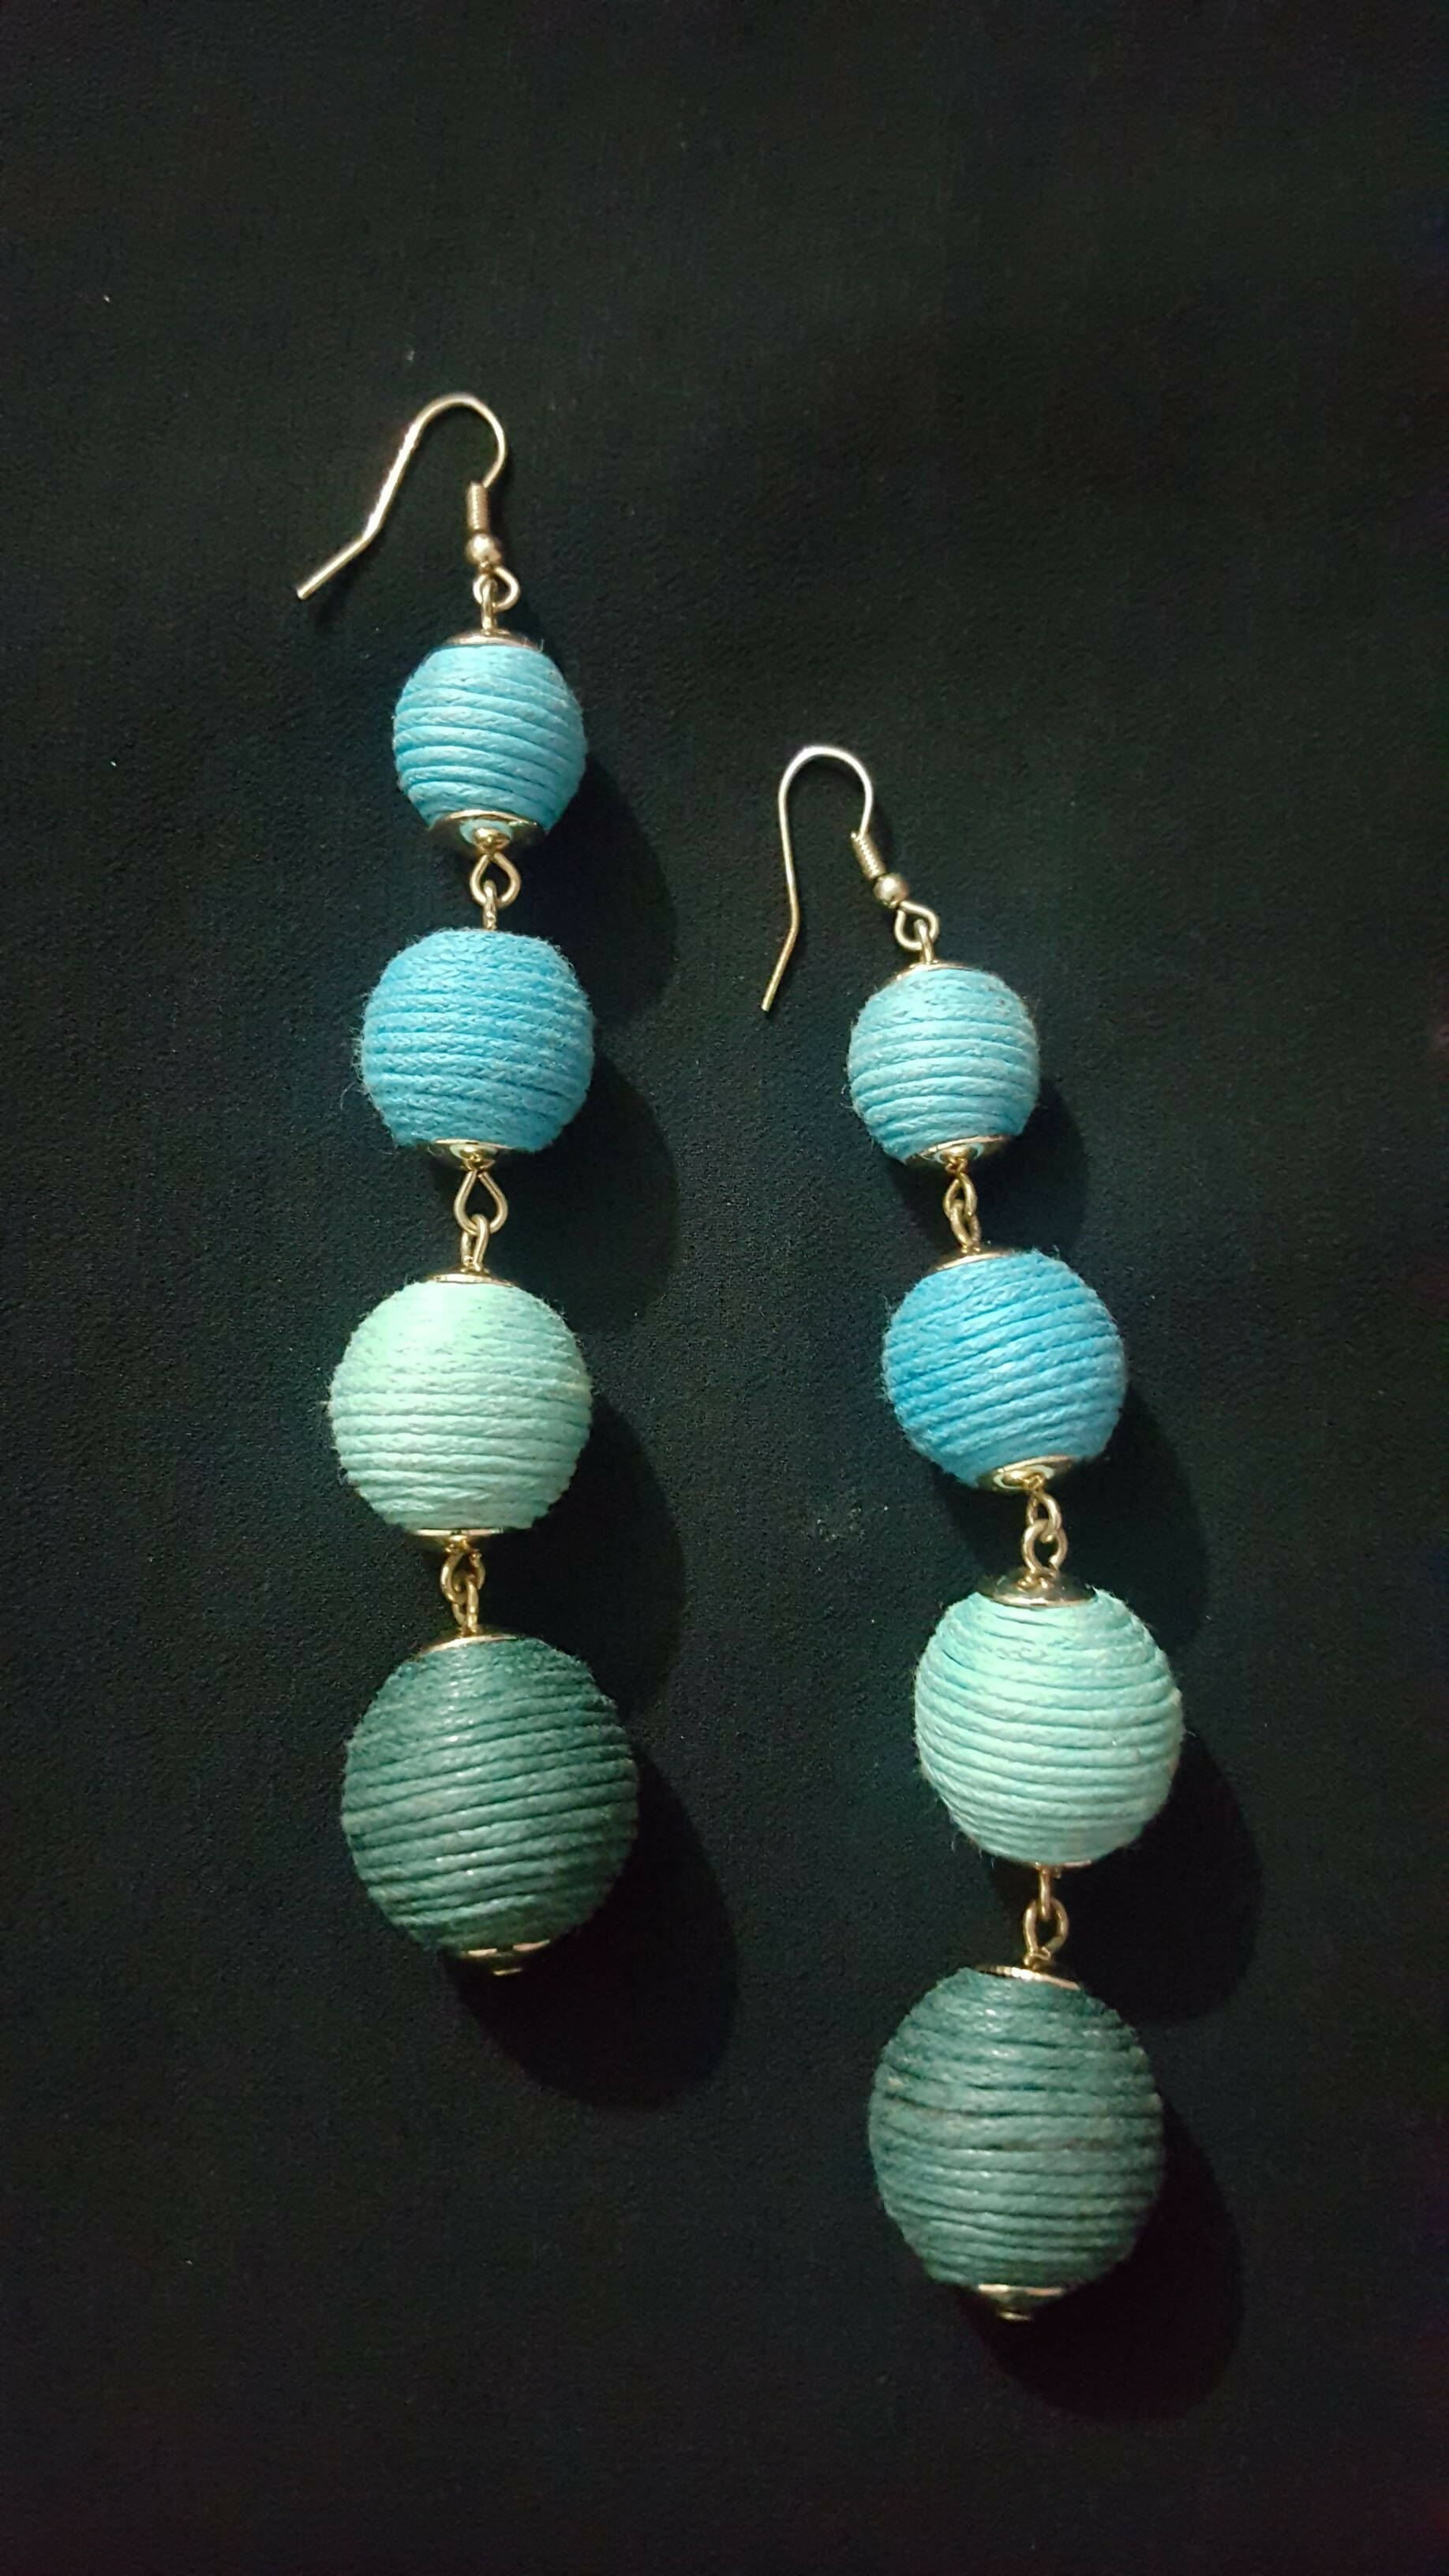 Perfect Shades of Blue Earrings | Women Jewelry | New